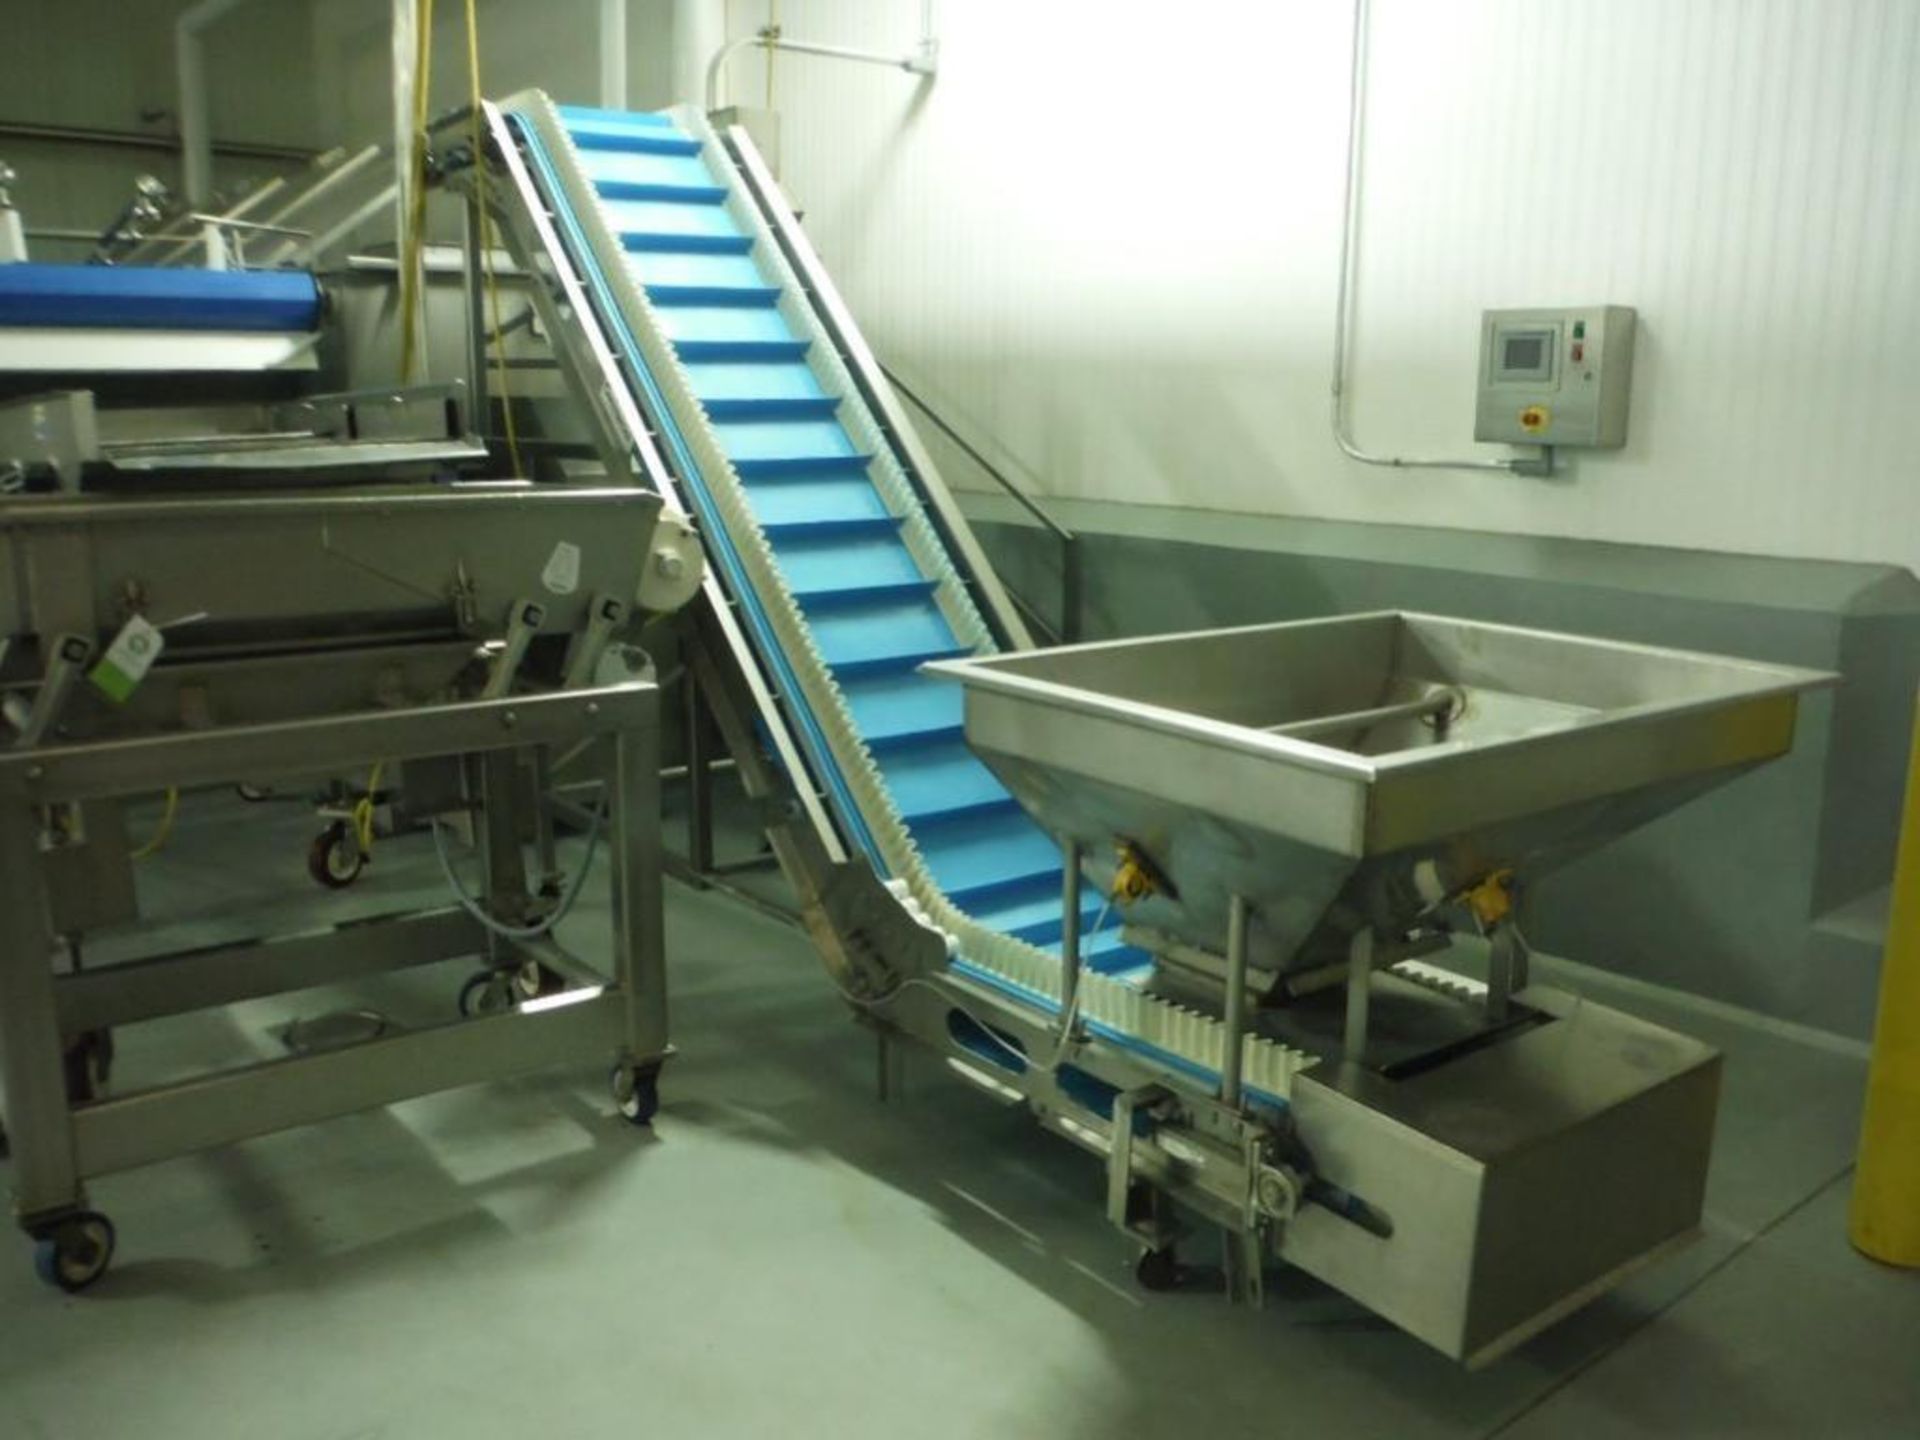 Commercial incline cleated belt conveyor, SN UBC0211-11560, 15 ft. long x 20 in. wide x 20 in. infee - Image 7 of 7